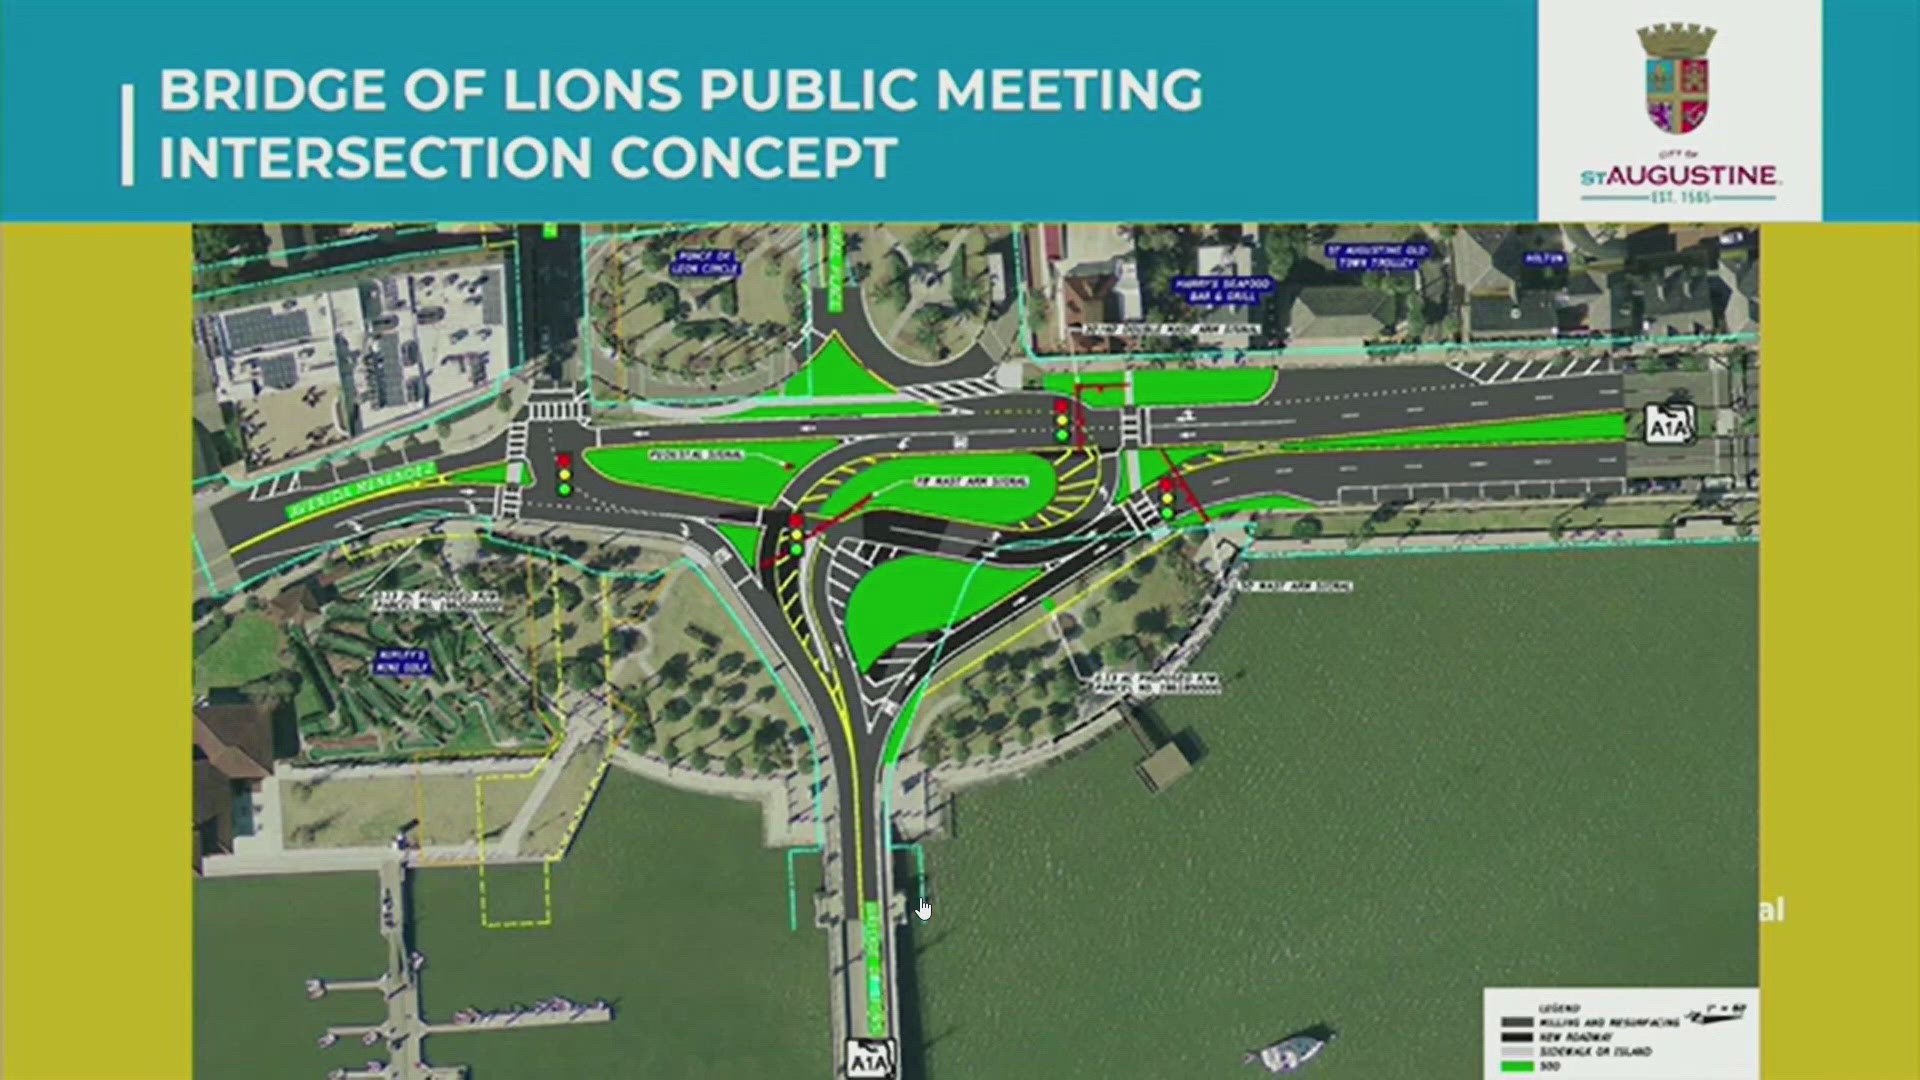 St. Augustine City Commission reviewed the latest concept to move traffic through the area faster.